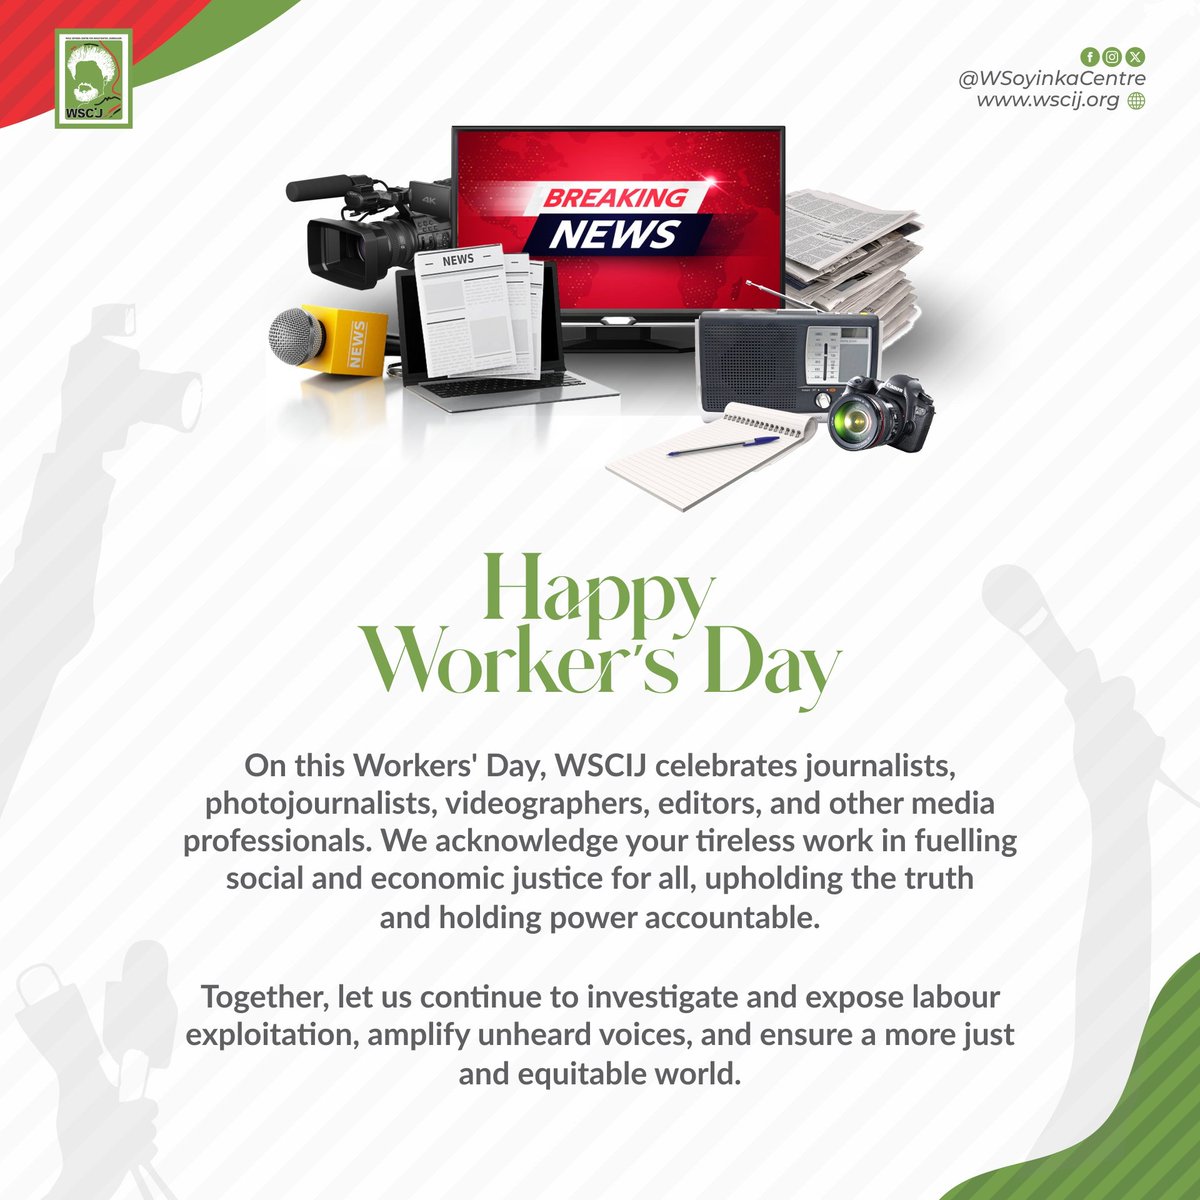 Happy Workers Day!